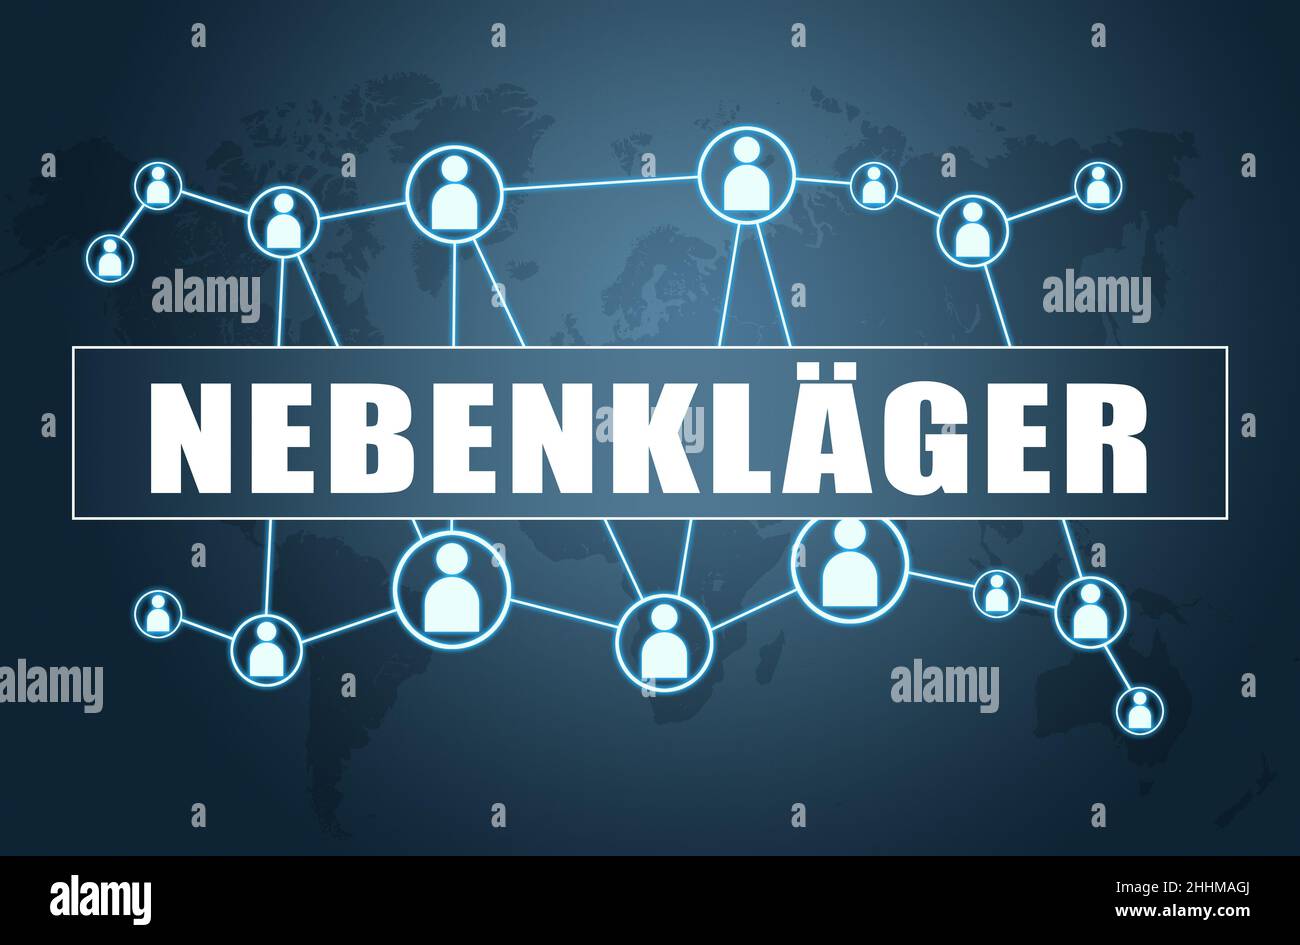 Nebenkläger - german word for joint plaintiff - text concept on blue background with world map and social icons. Stock Photo